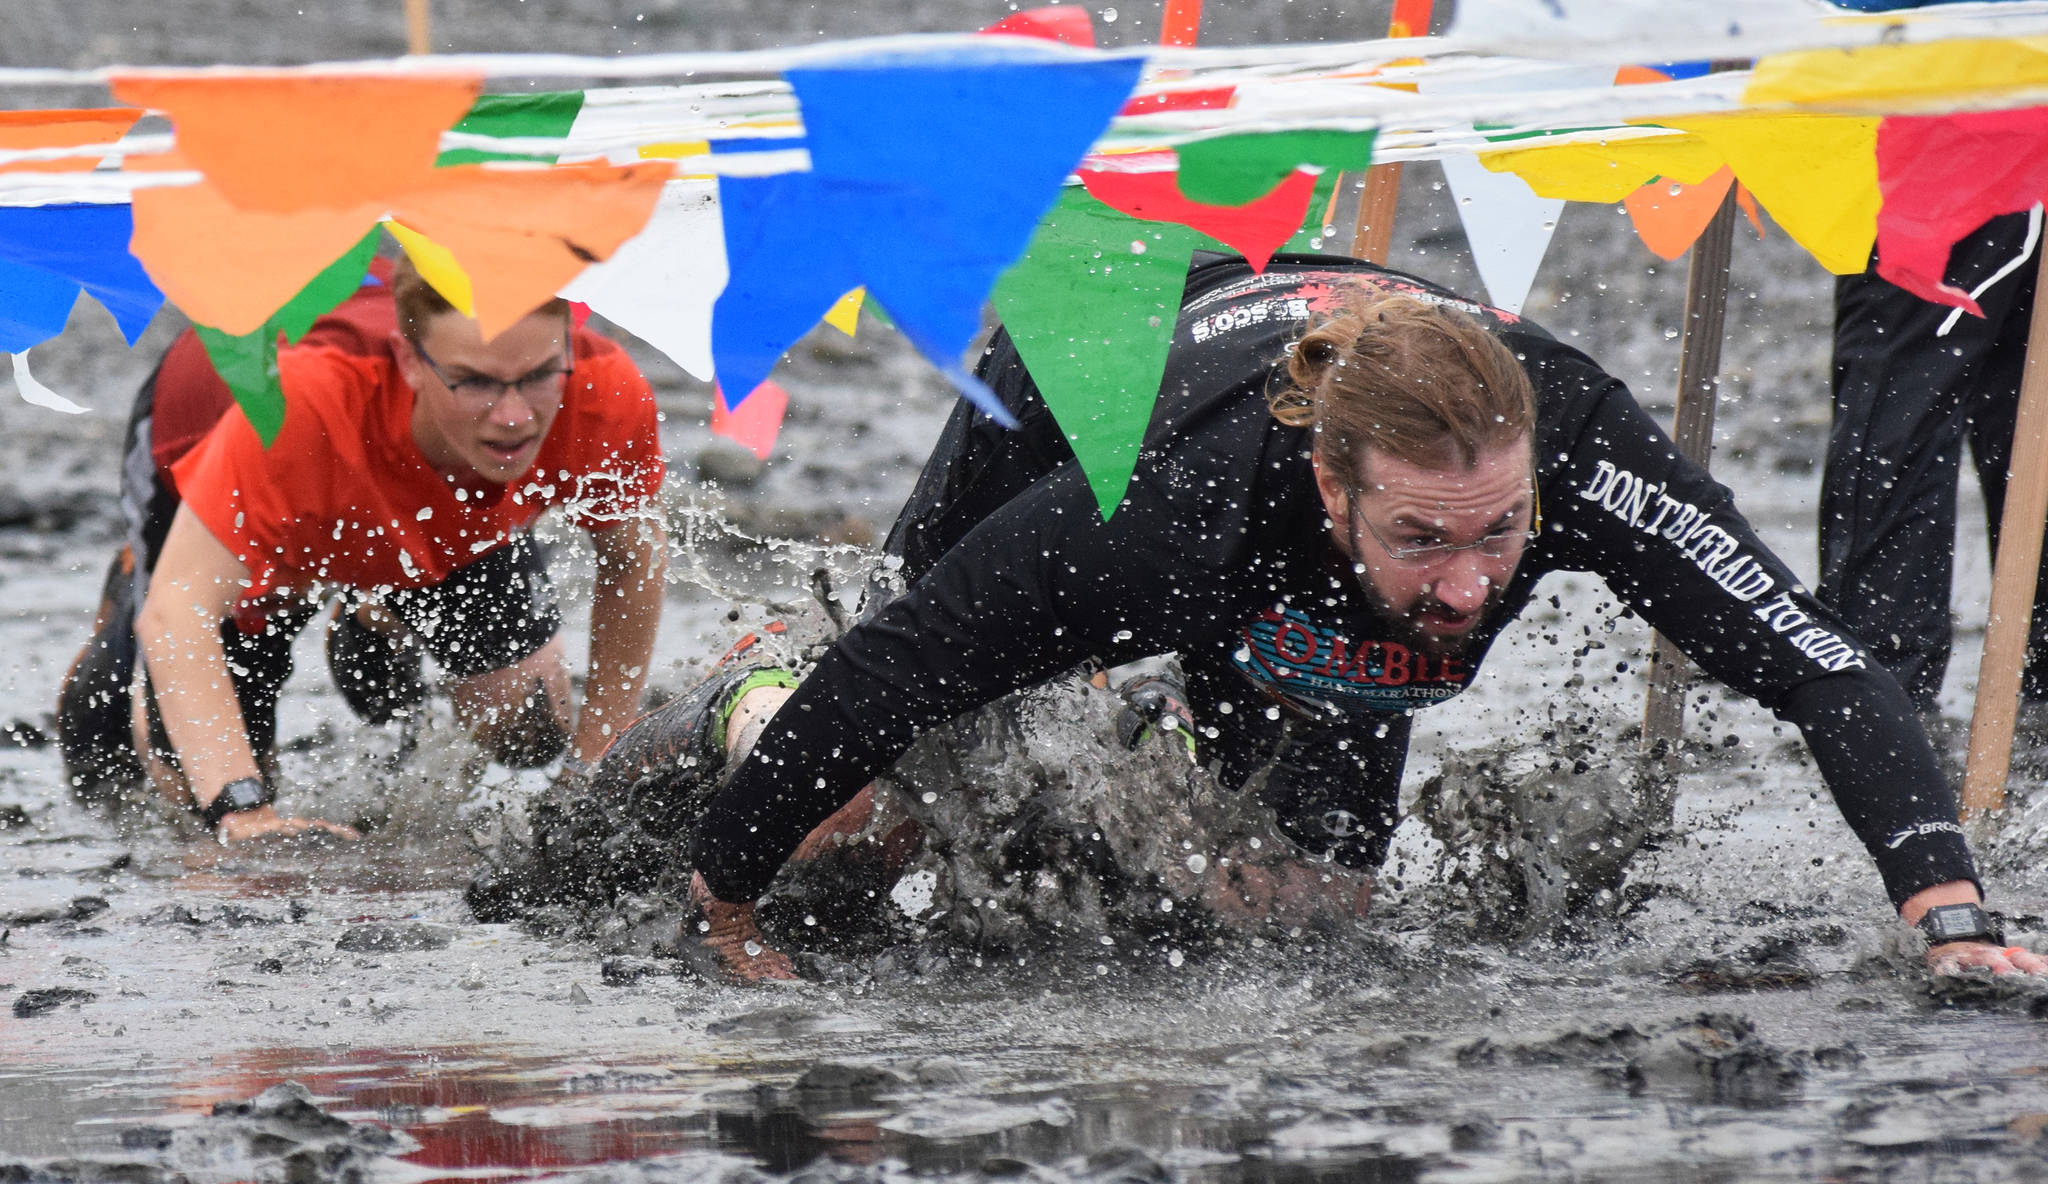 Zachary Ricketts (right) leads Tyler Hippchen through the mud Saturday, June 15, 2019, at the Ninilchik Clam Scramble Mud and Obstacle Run in Ninilchik, Alaska. (Photo by Joey Klecka/Peninsula Clarion)